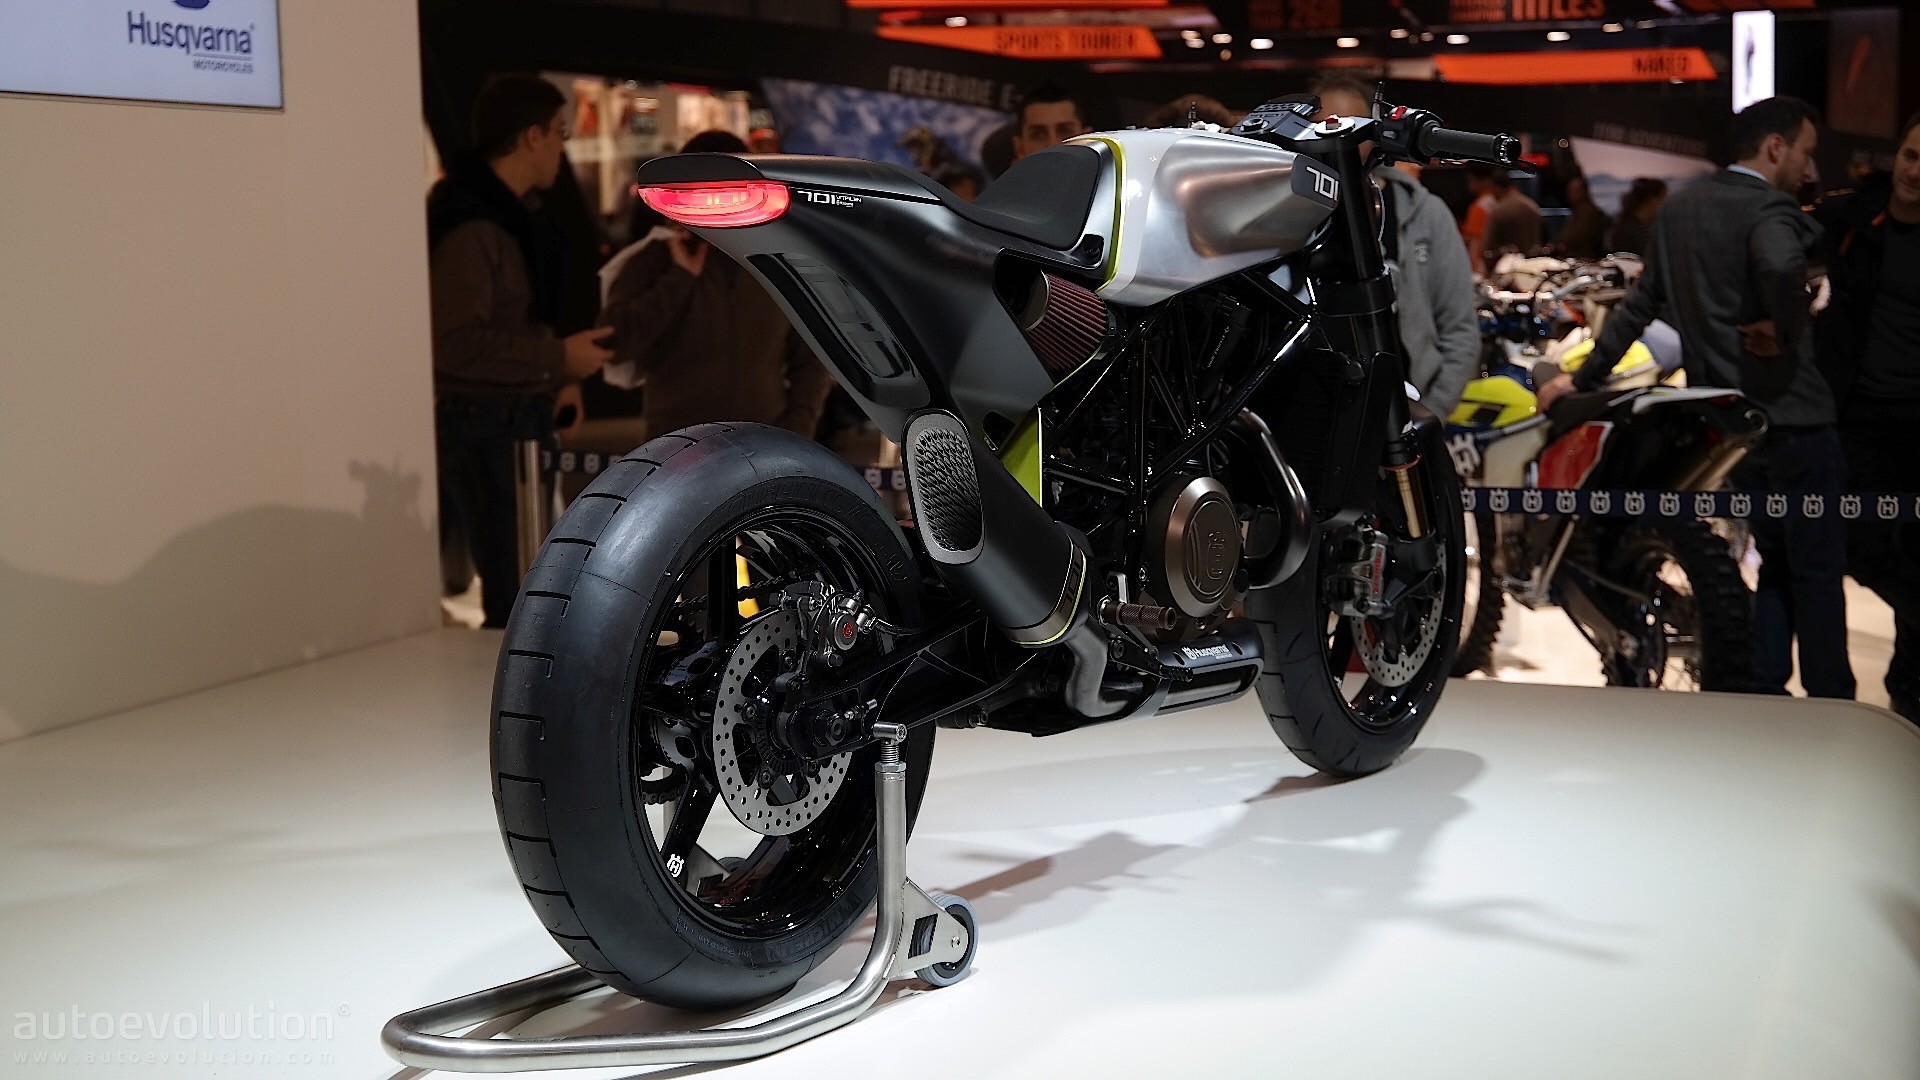 EICMA 2015: Husqvarna Vitpilen 701 Concept Is Another Great-Looking ...